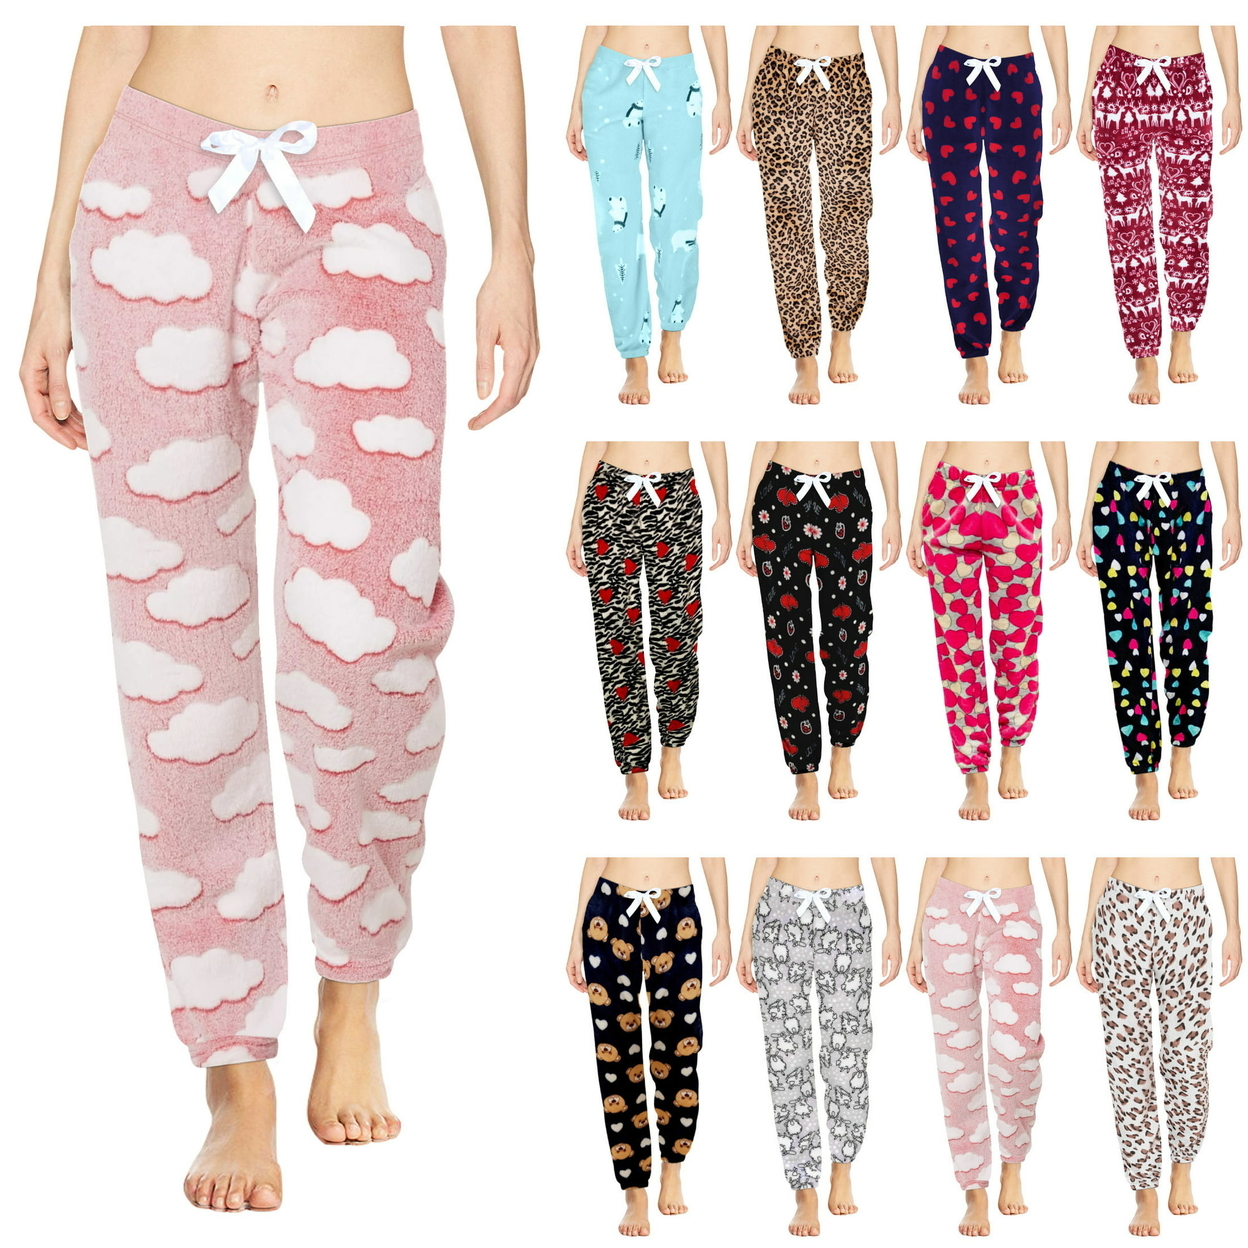 4-Pack: Women's Solid & Printed Ultra-Soft Comfy Stretch Micro-Fleece Pajama Lounge Pants - Large, Love